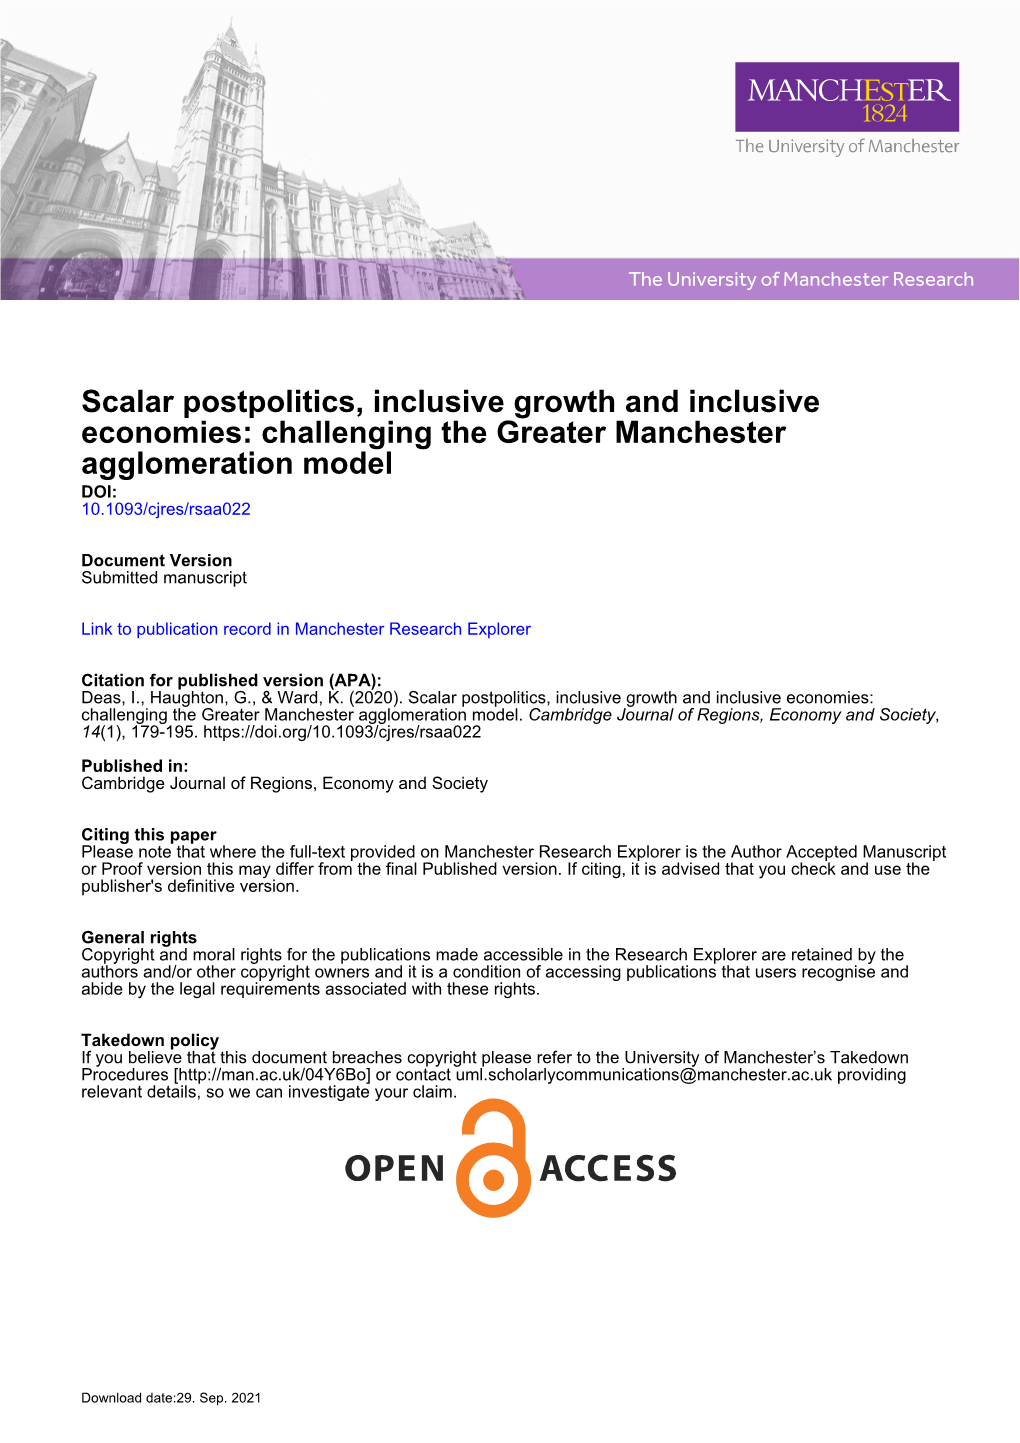 Scalar Postpolitics, Inclusive Growth and Inclusive Economies: Challenging the Greater Manchester Agglomeration Model DOI: 10.1093/Cjres/Rsaa022